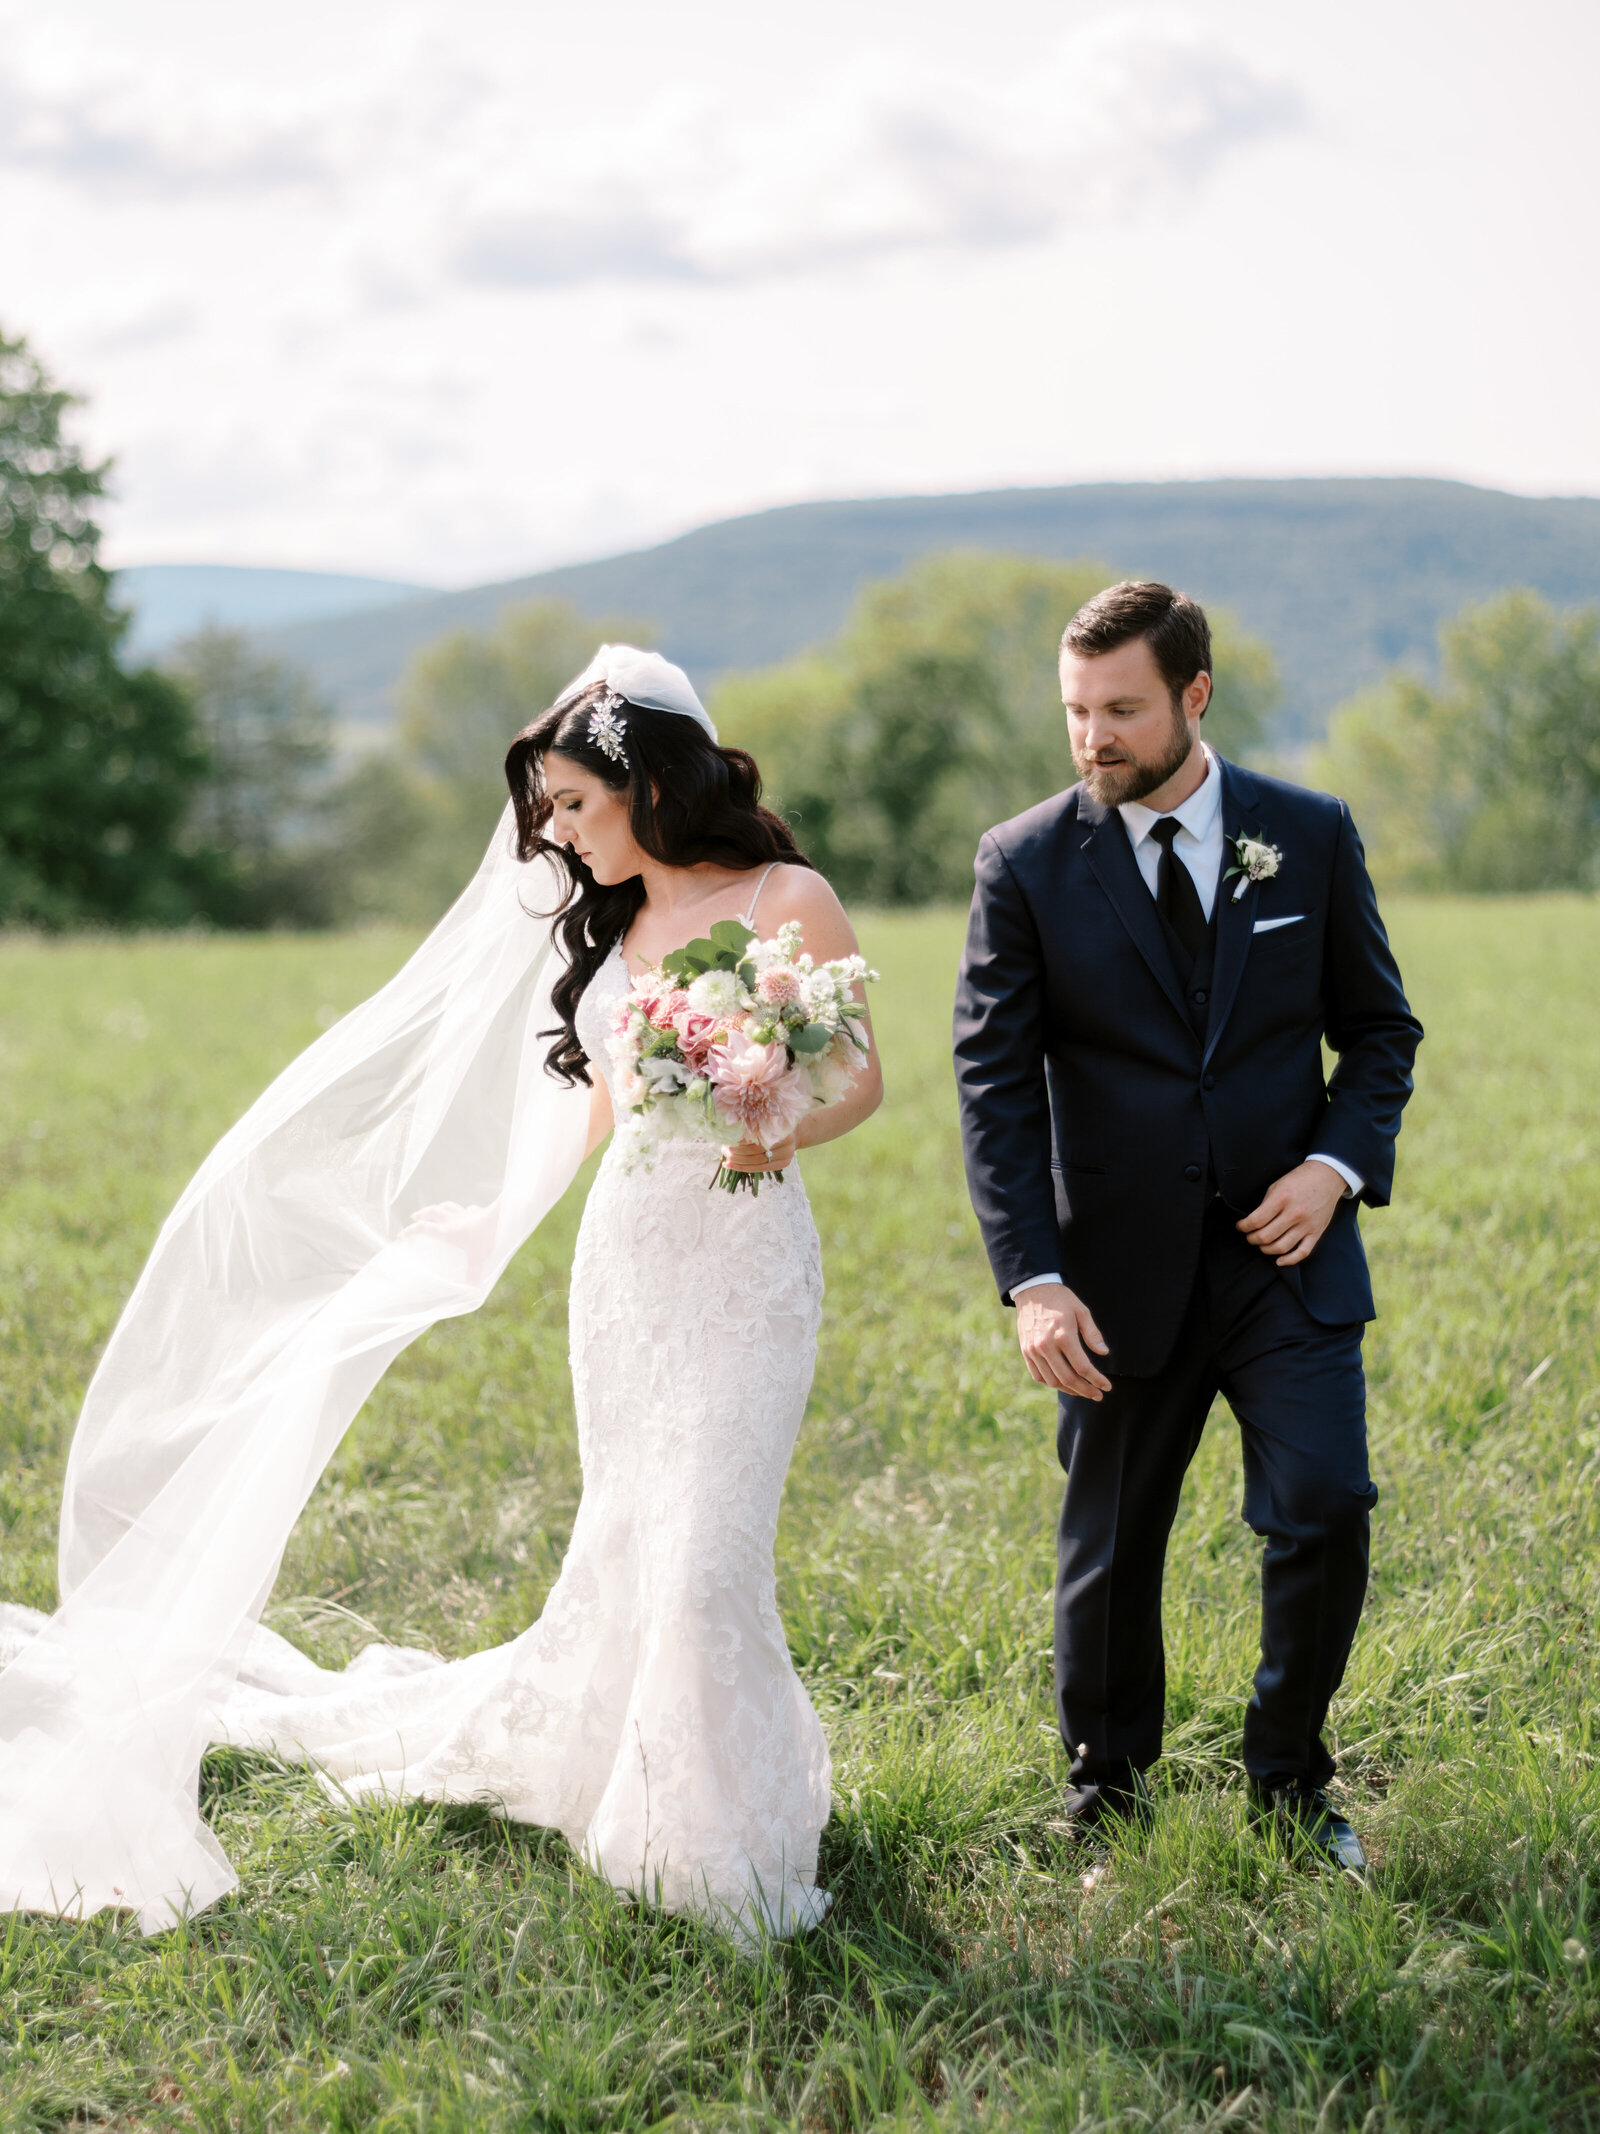 Lindsay Lazare Photography New York Wedding Engagement Photographer Hudson Valley Destination Travel Intentional Timeless Connection Drive Luxury Heirloom Photographs Photos  LLPF0697